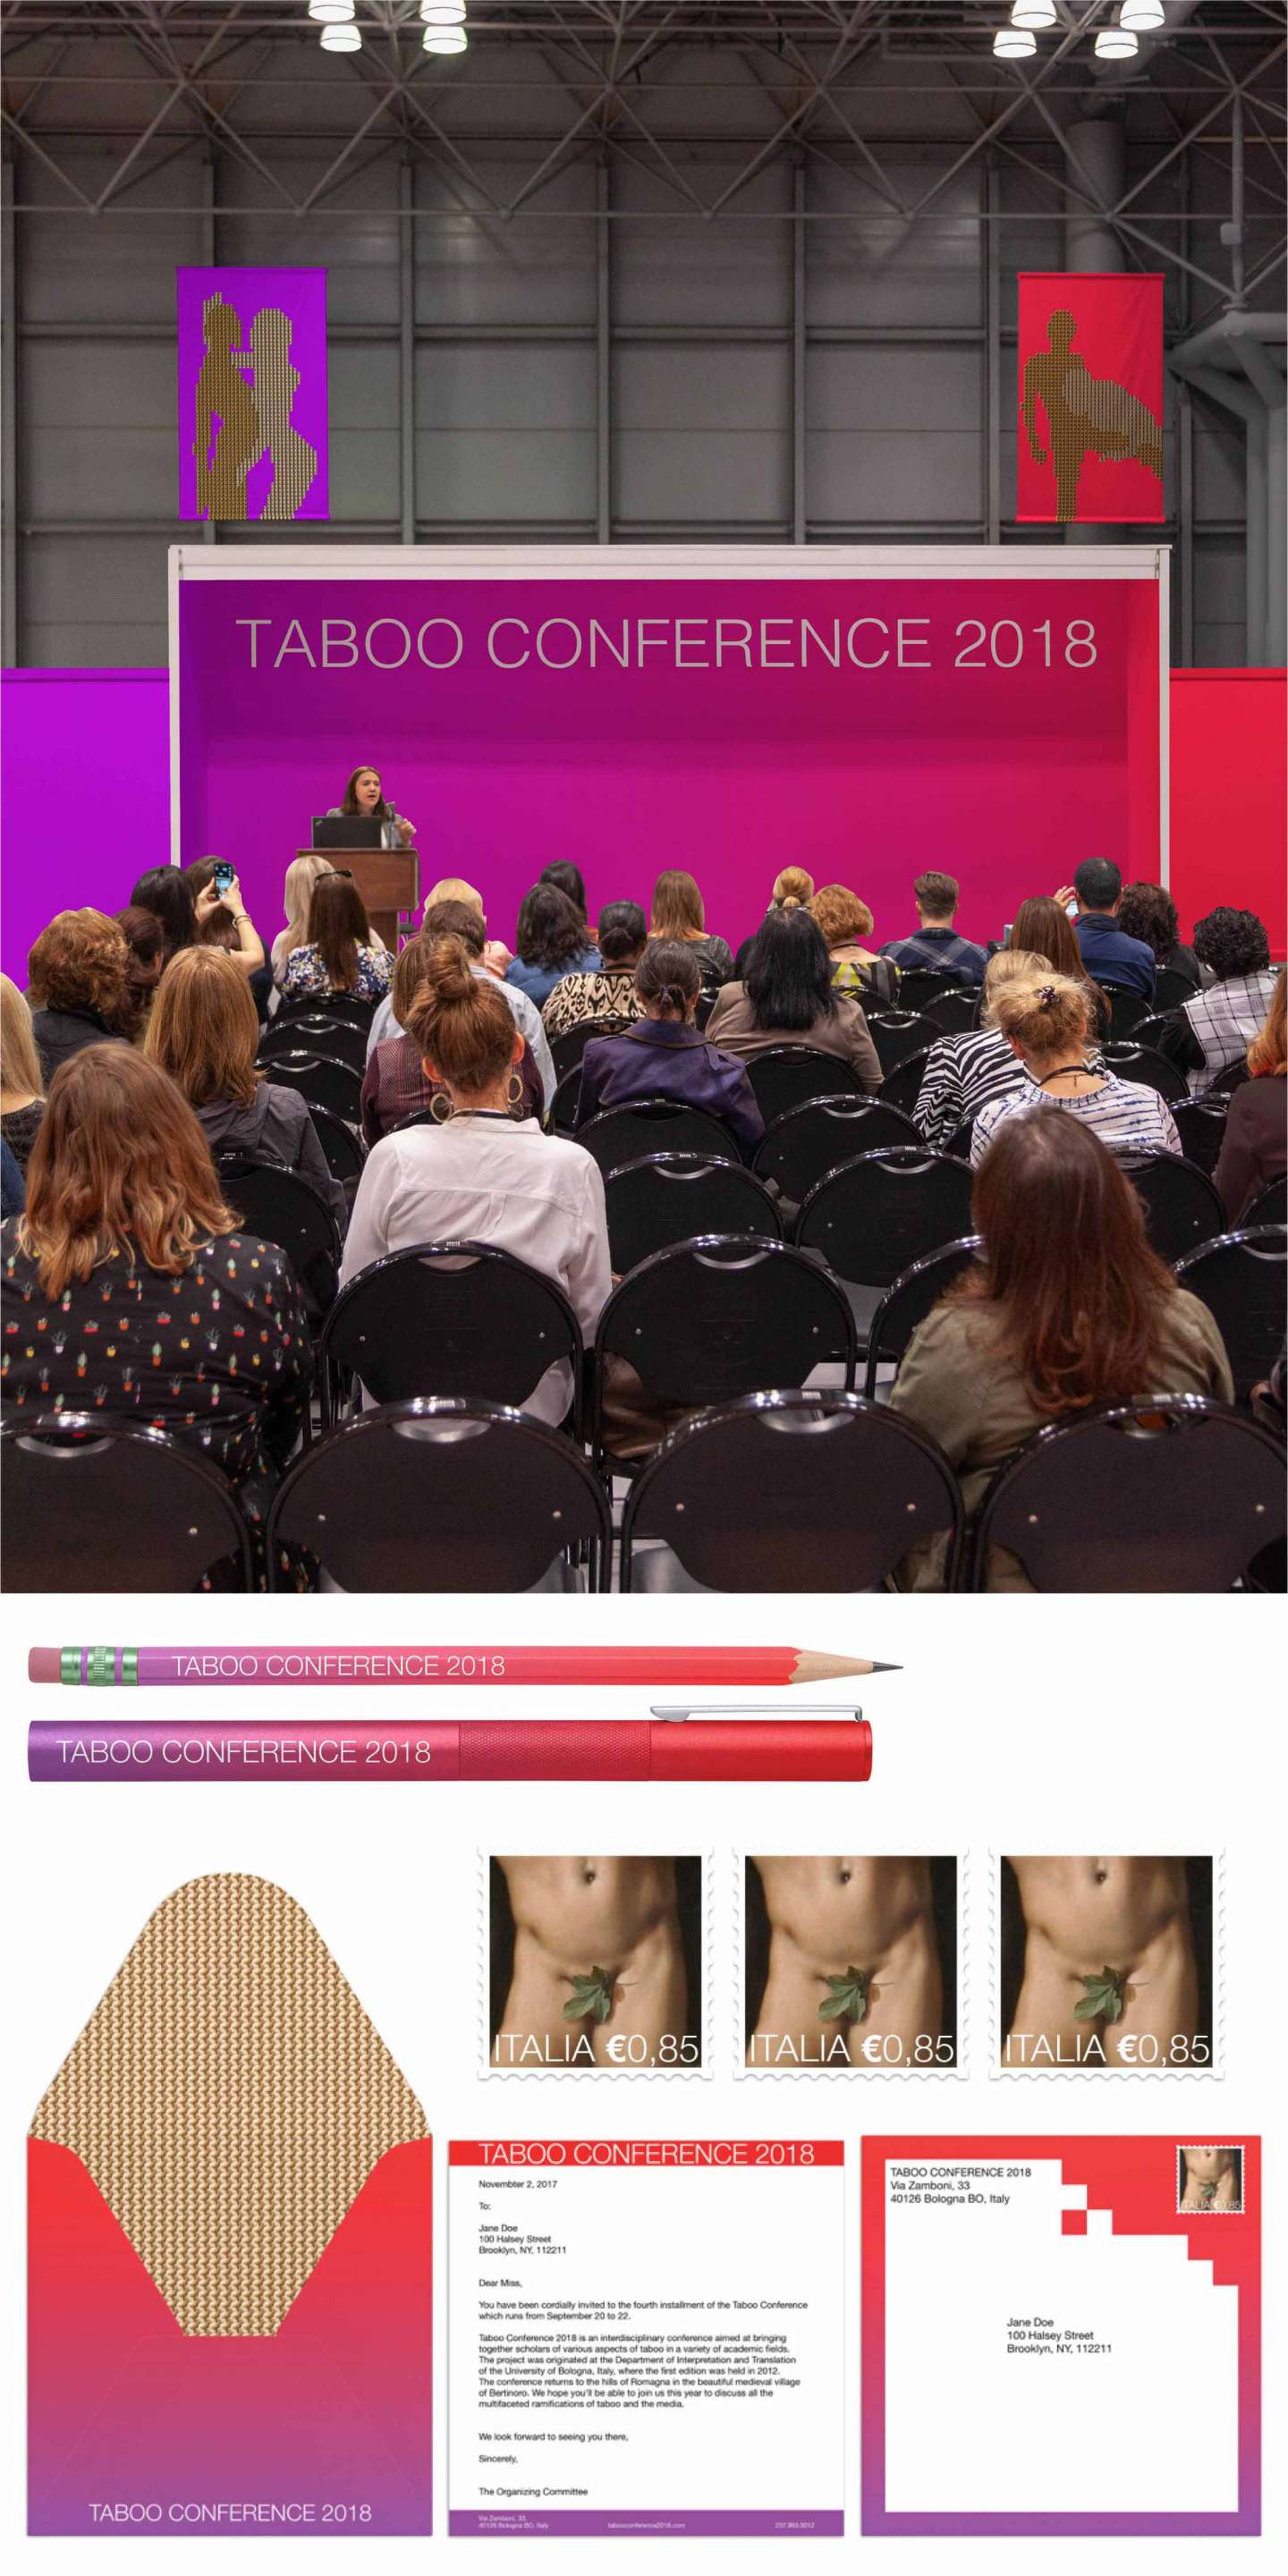 Taboo Conference 2018